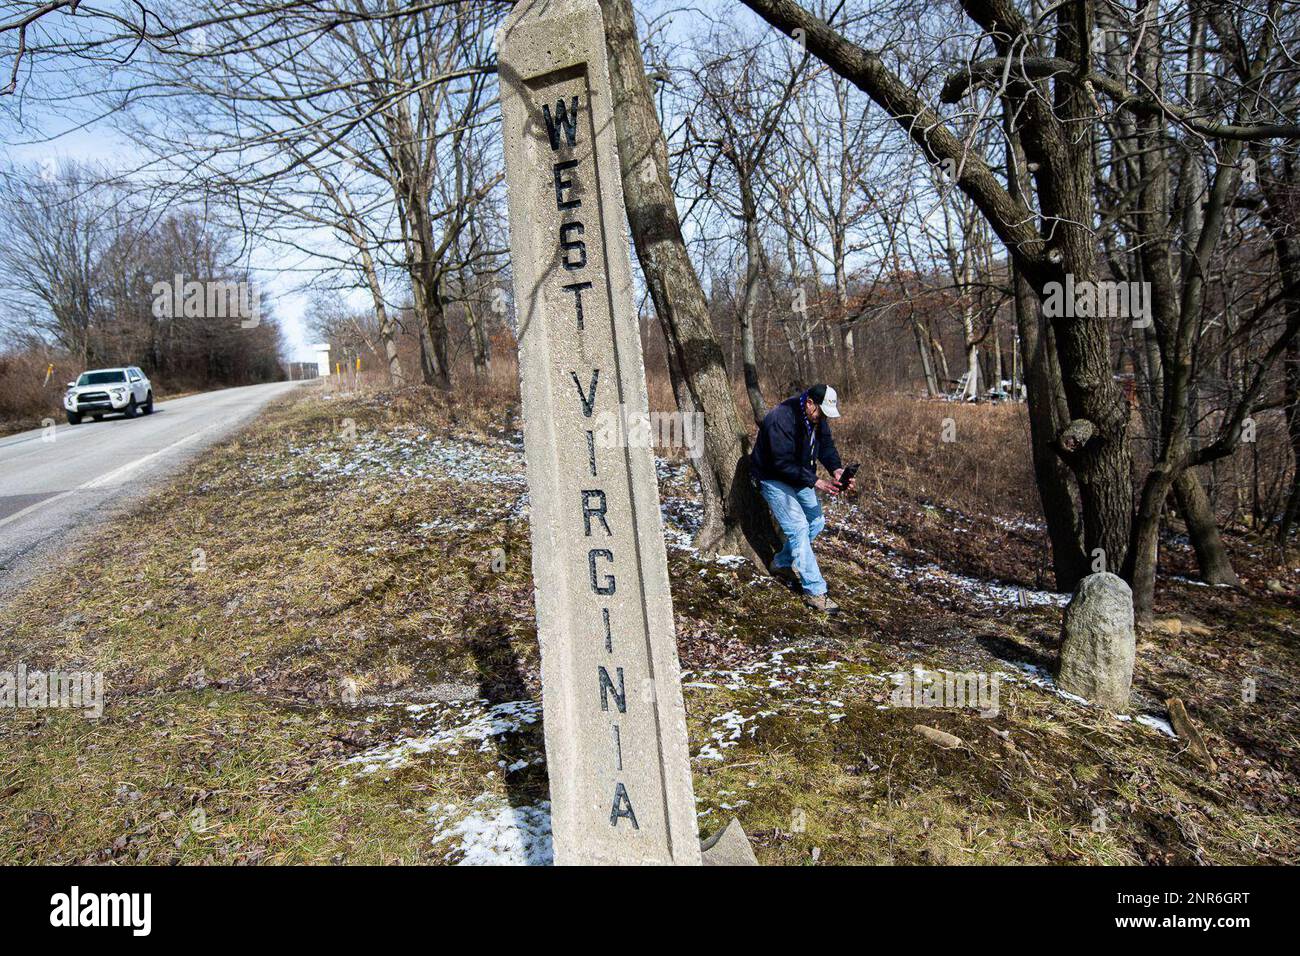 Pat Simon, a land surveyor from Bel Air, Md., and the chief of surveys for  Baltimore County, takes a photograph of a concrete state line marker  Saturday, Feb. 15, 2020 near the